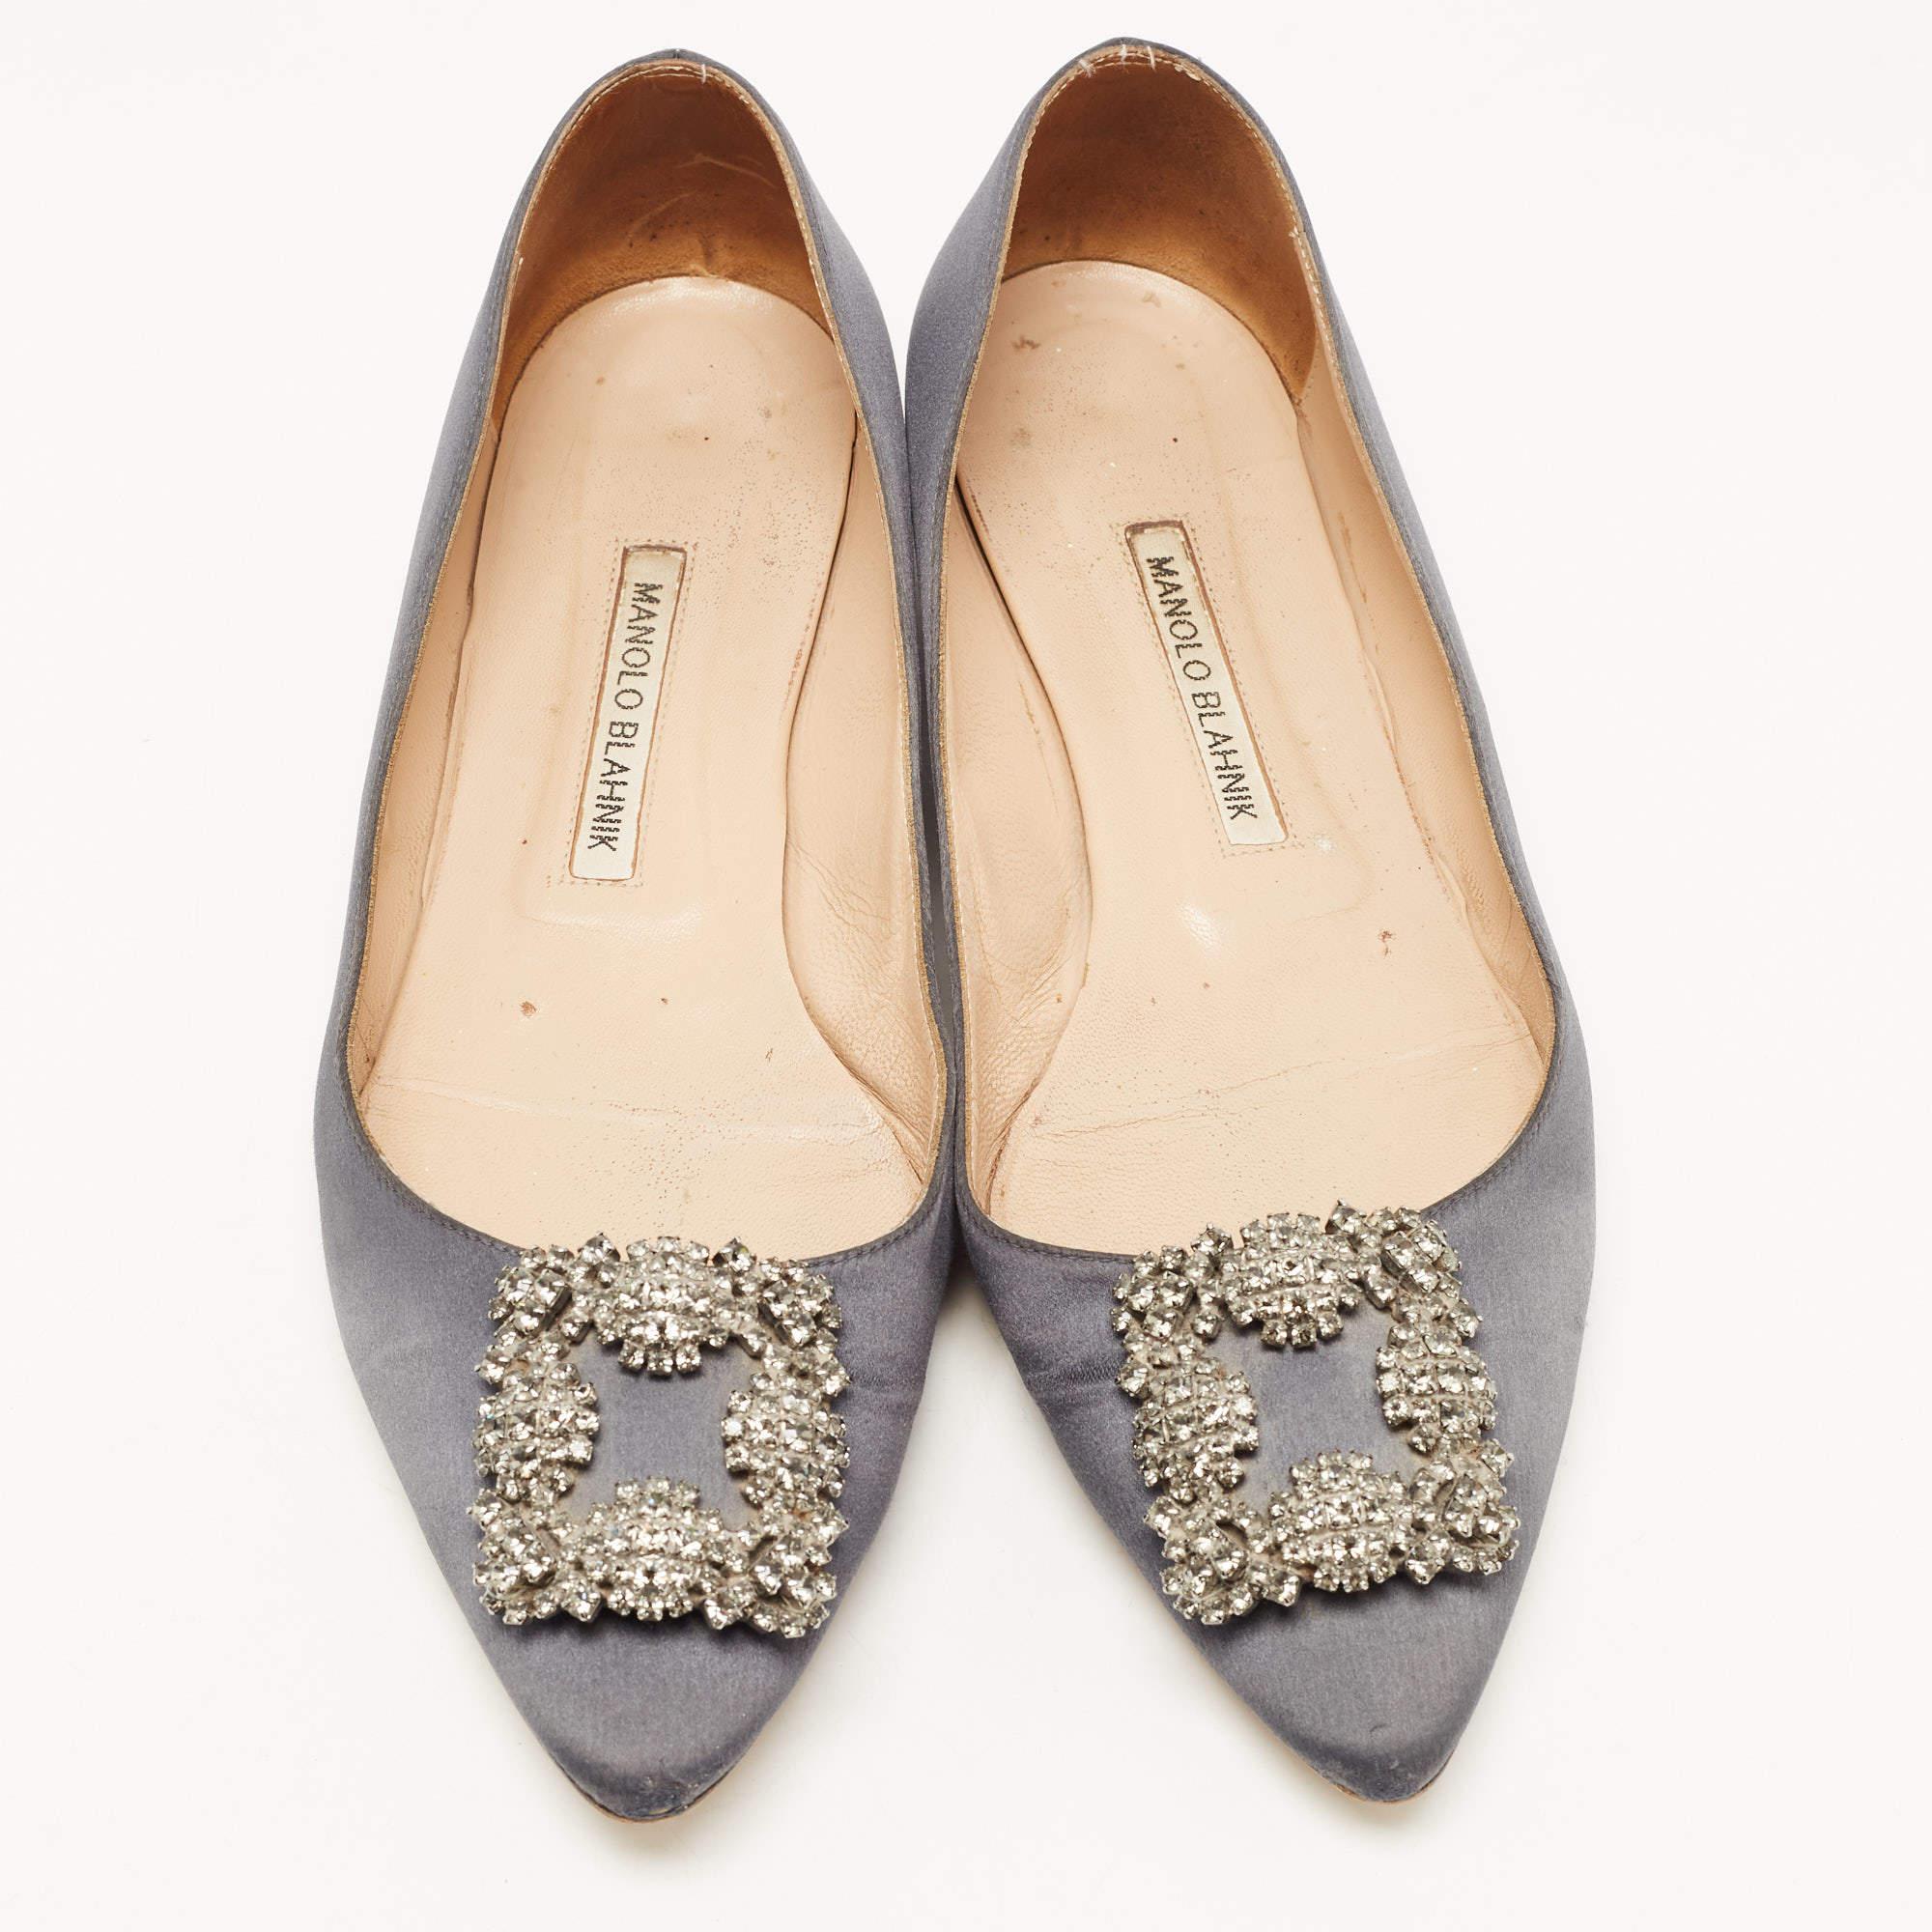 You know you are going to have a glamorous day the moment you put these ballet flats on. They are a Manolo Blahnik creation, meticulously crafted from satin and lined with leather on the insoles. The pair carries a classic grey hue and